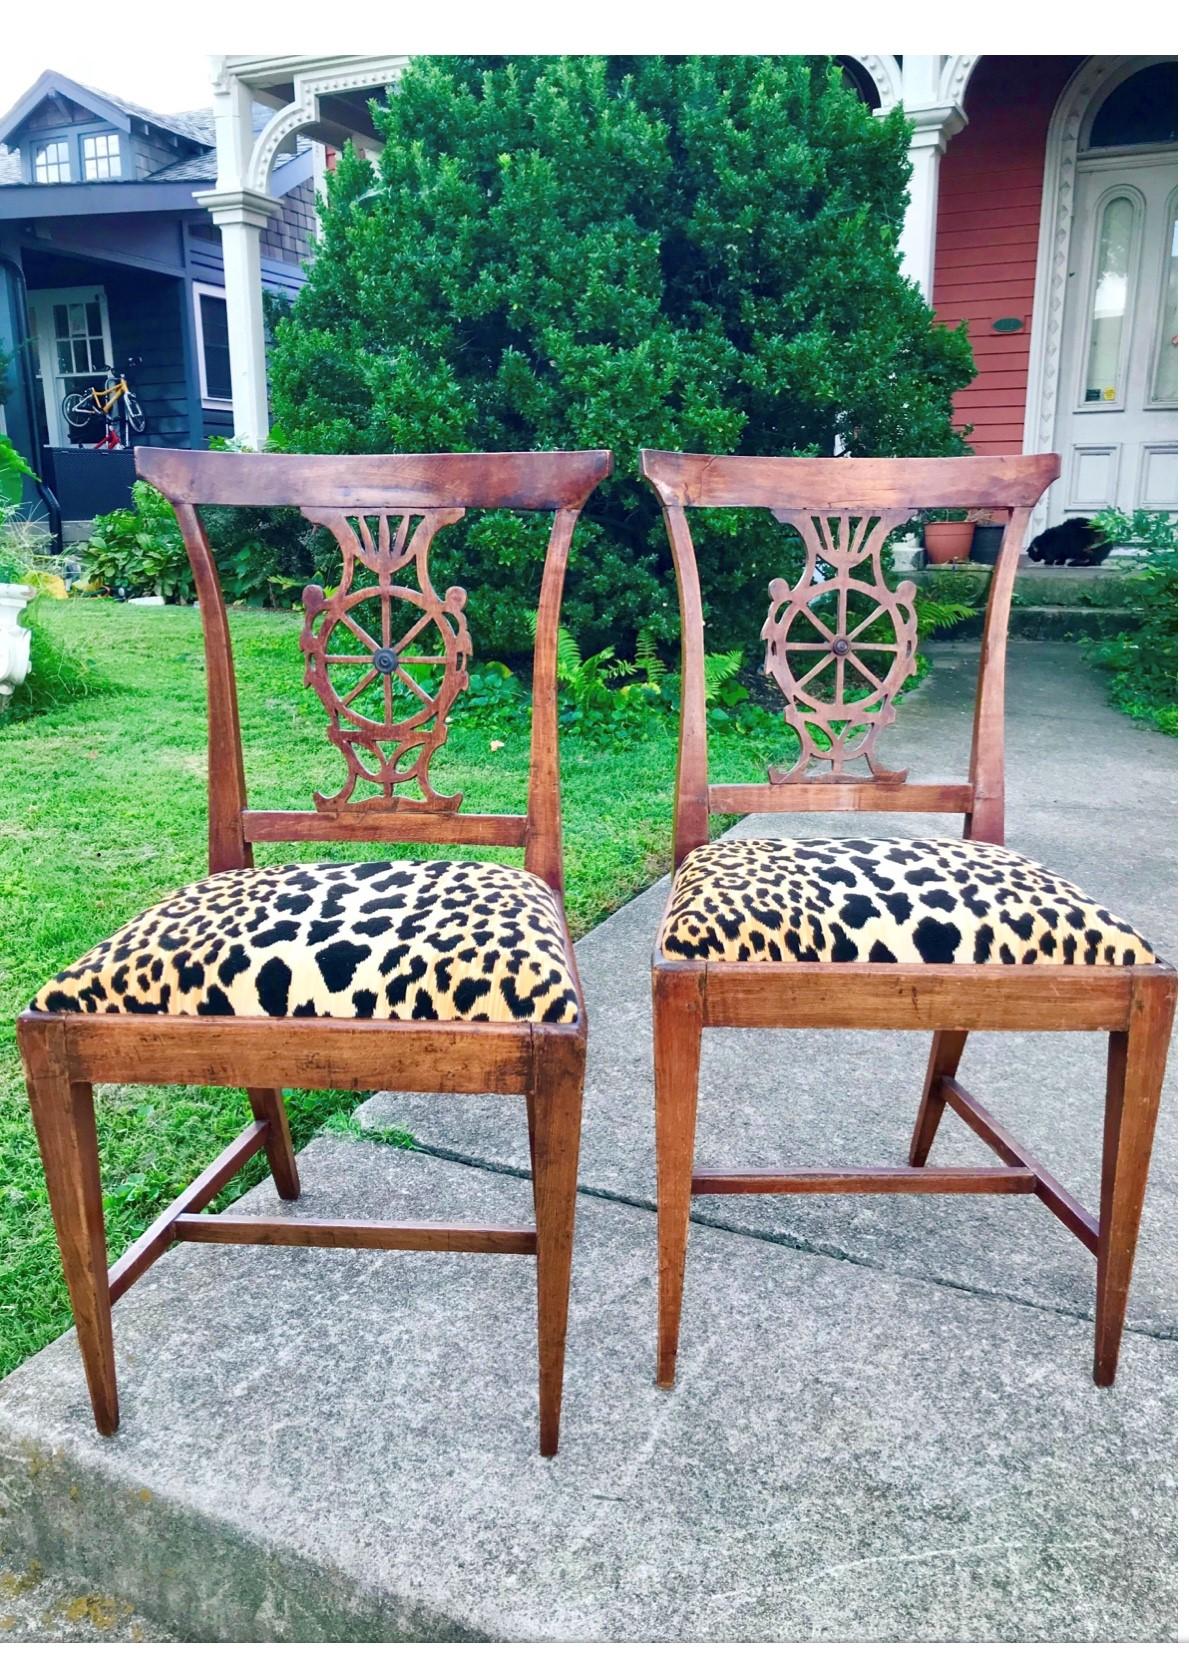 In leopard or cheetah velvet. Both in hand carved and peg constructed. Directoire frames and of slight Klismos form. Pretty well untouched (other than new leopard velvet seat covering), no later screws or glue blocks and still all four are